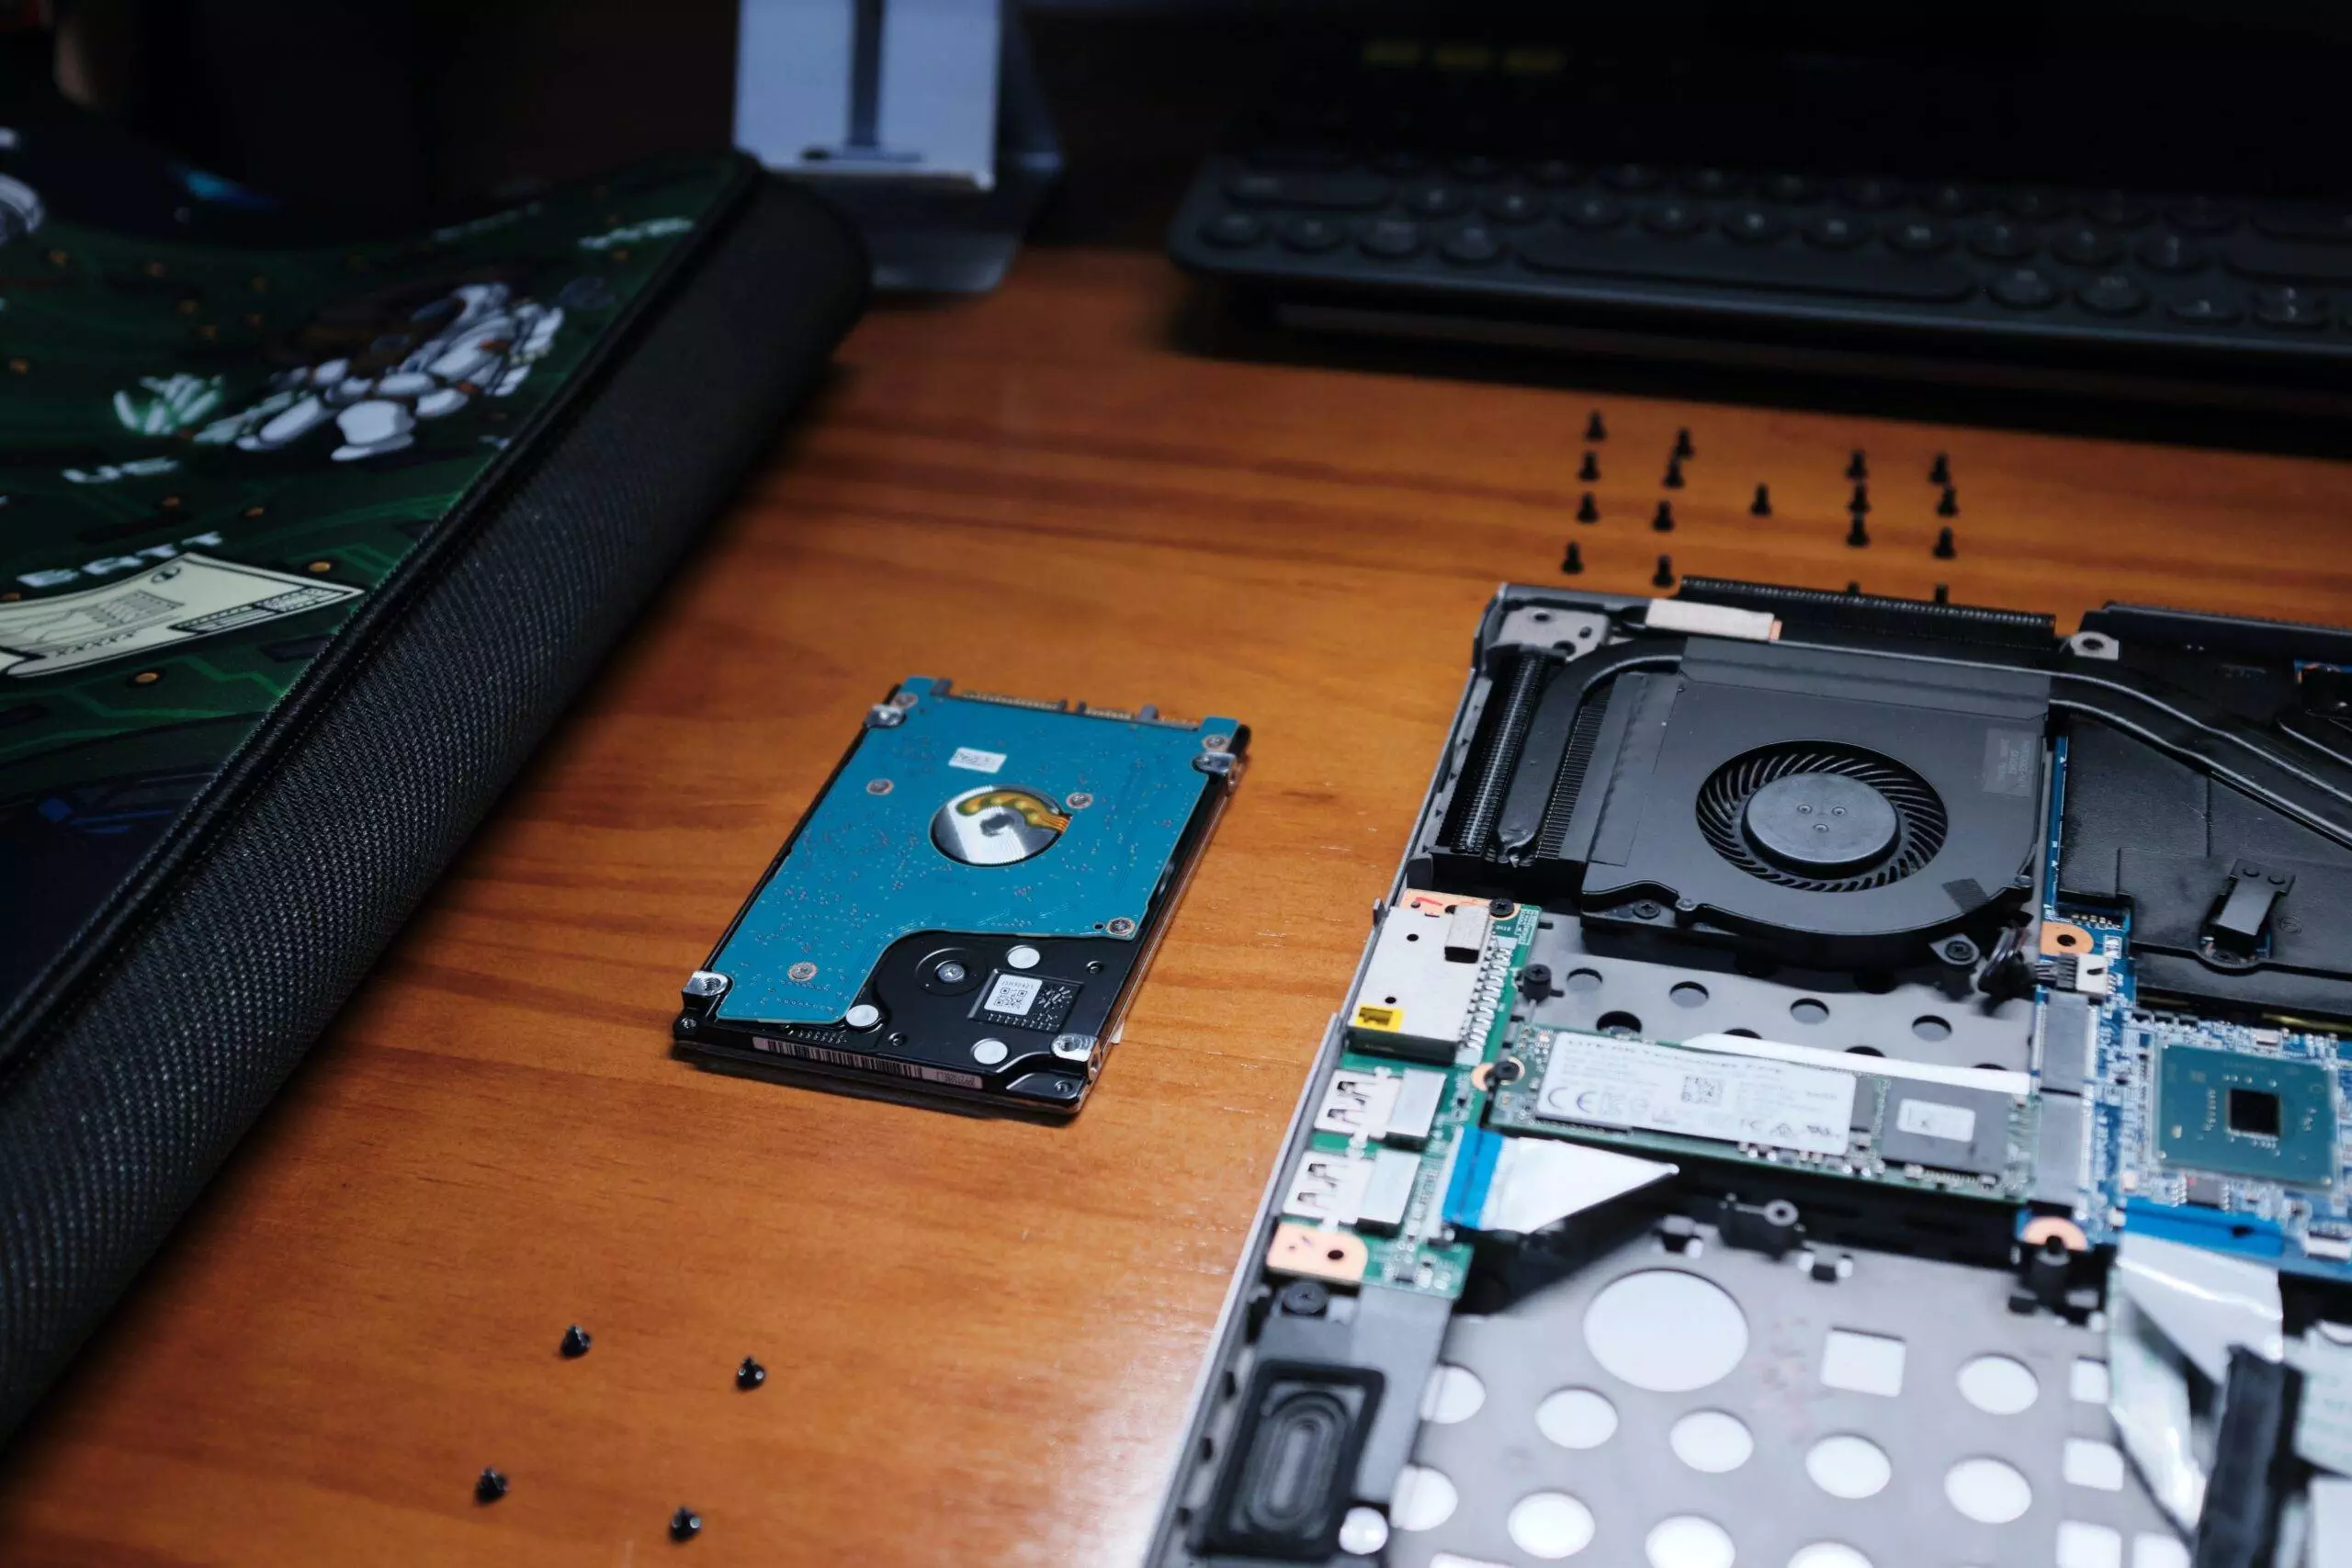 Laptop hard drive repair just completed on a PC laptop.